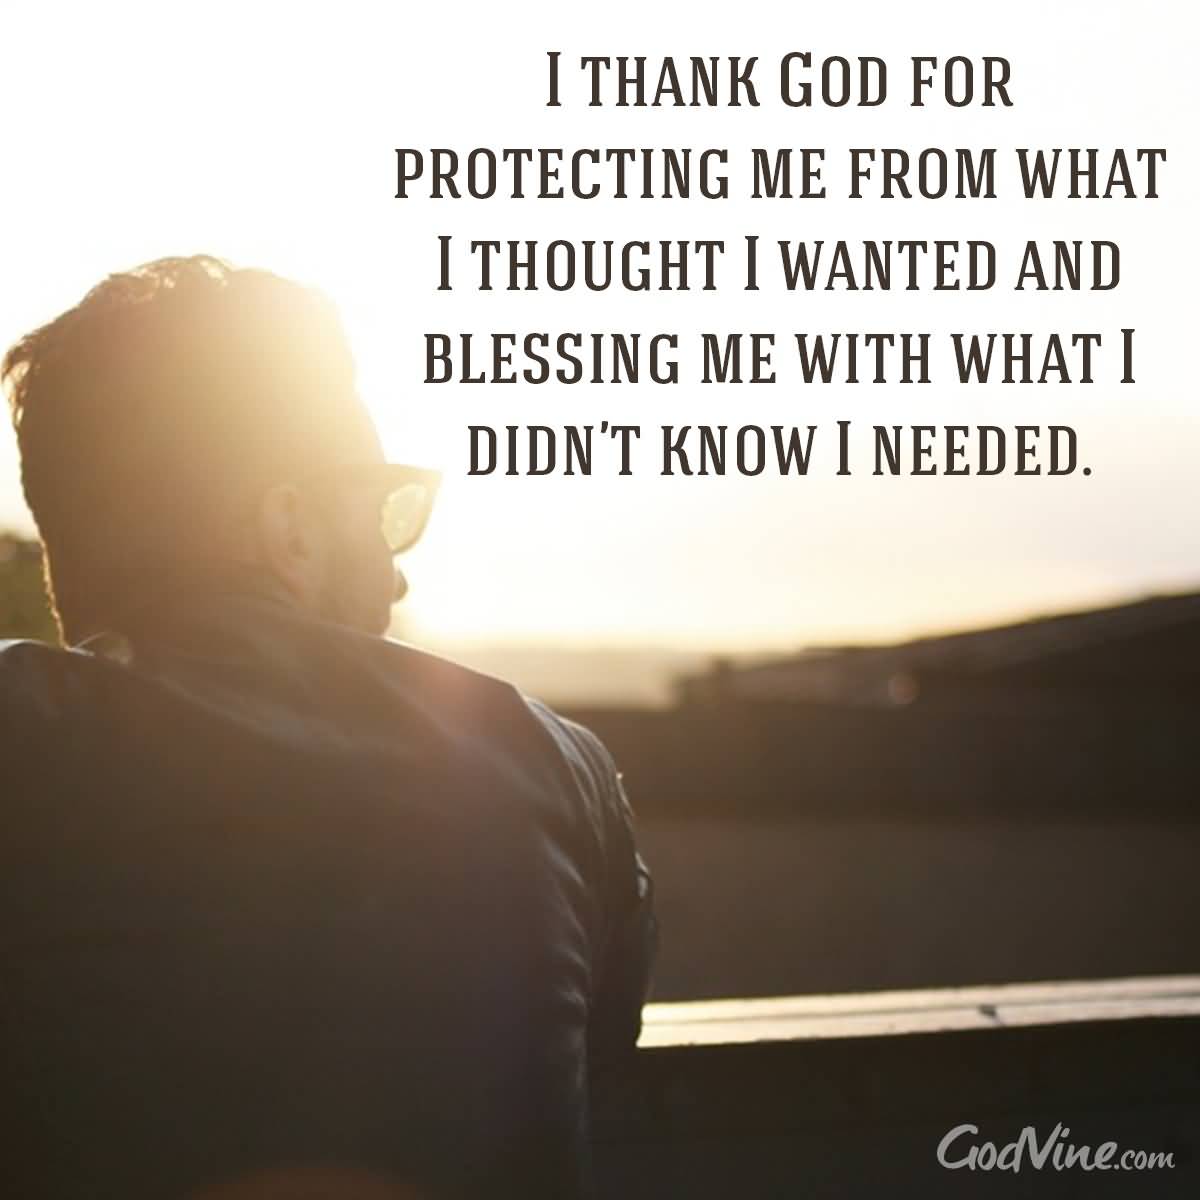 I Thank God For Protecting Me From What I Thought I Wanted And Blessing Me With